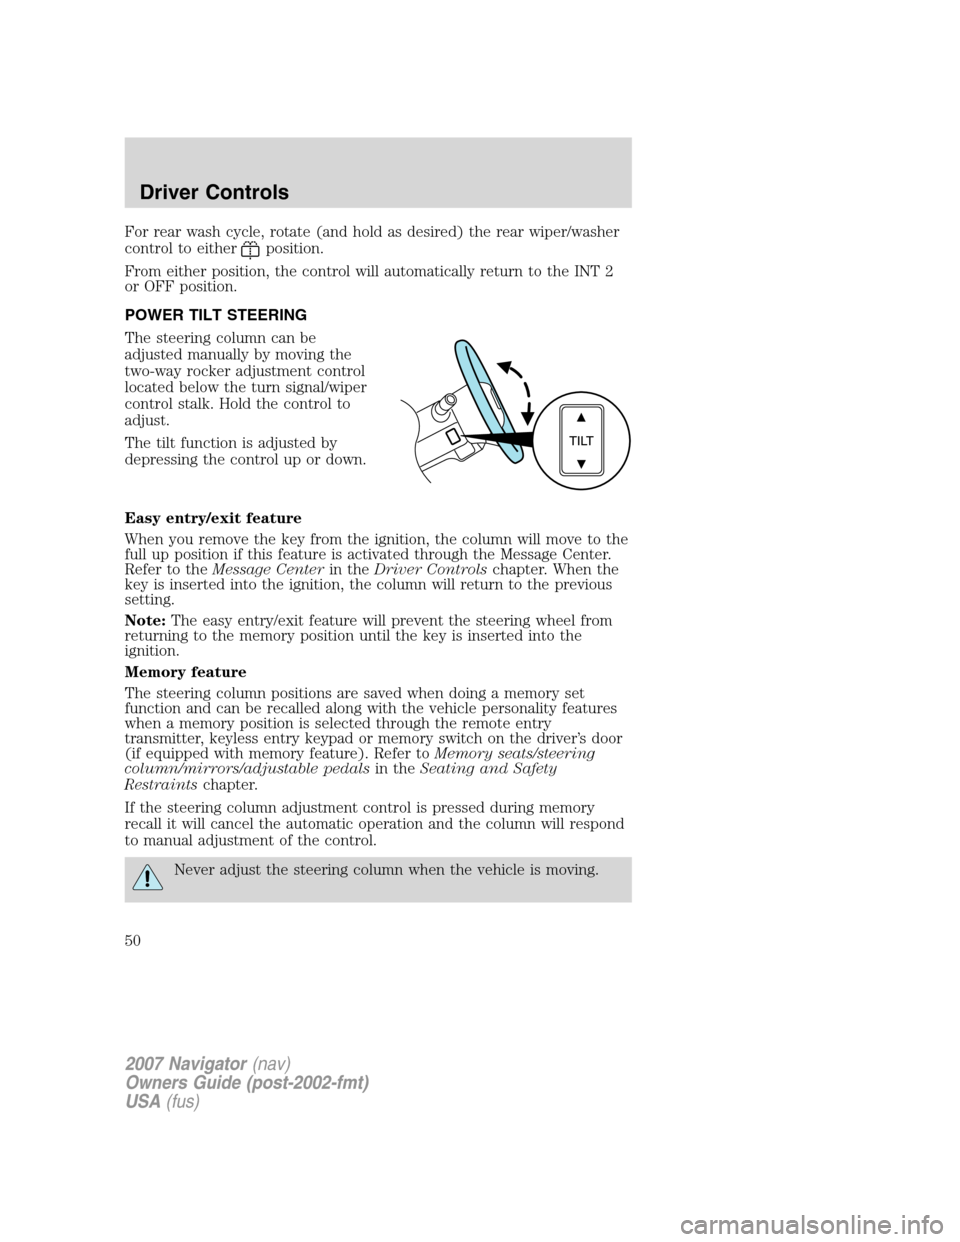 LINCOLN NAVIGATOR 2007 Service Manual For rear wash cycle, rotate (and hold as desired) the rear wiper/washer
control to either
position.
From either position, the control will automatically return to the INT 2
or OFF position.
POWER TILT